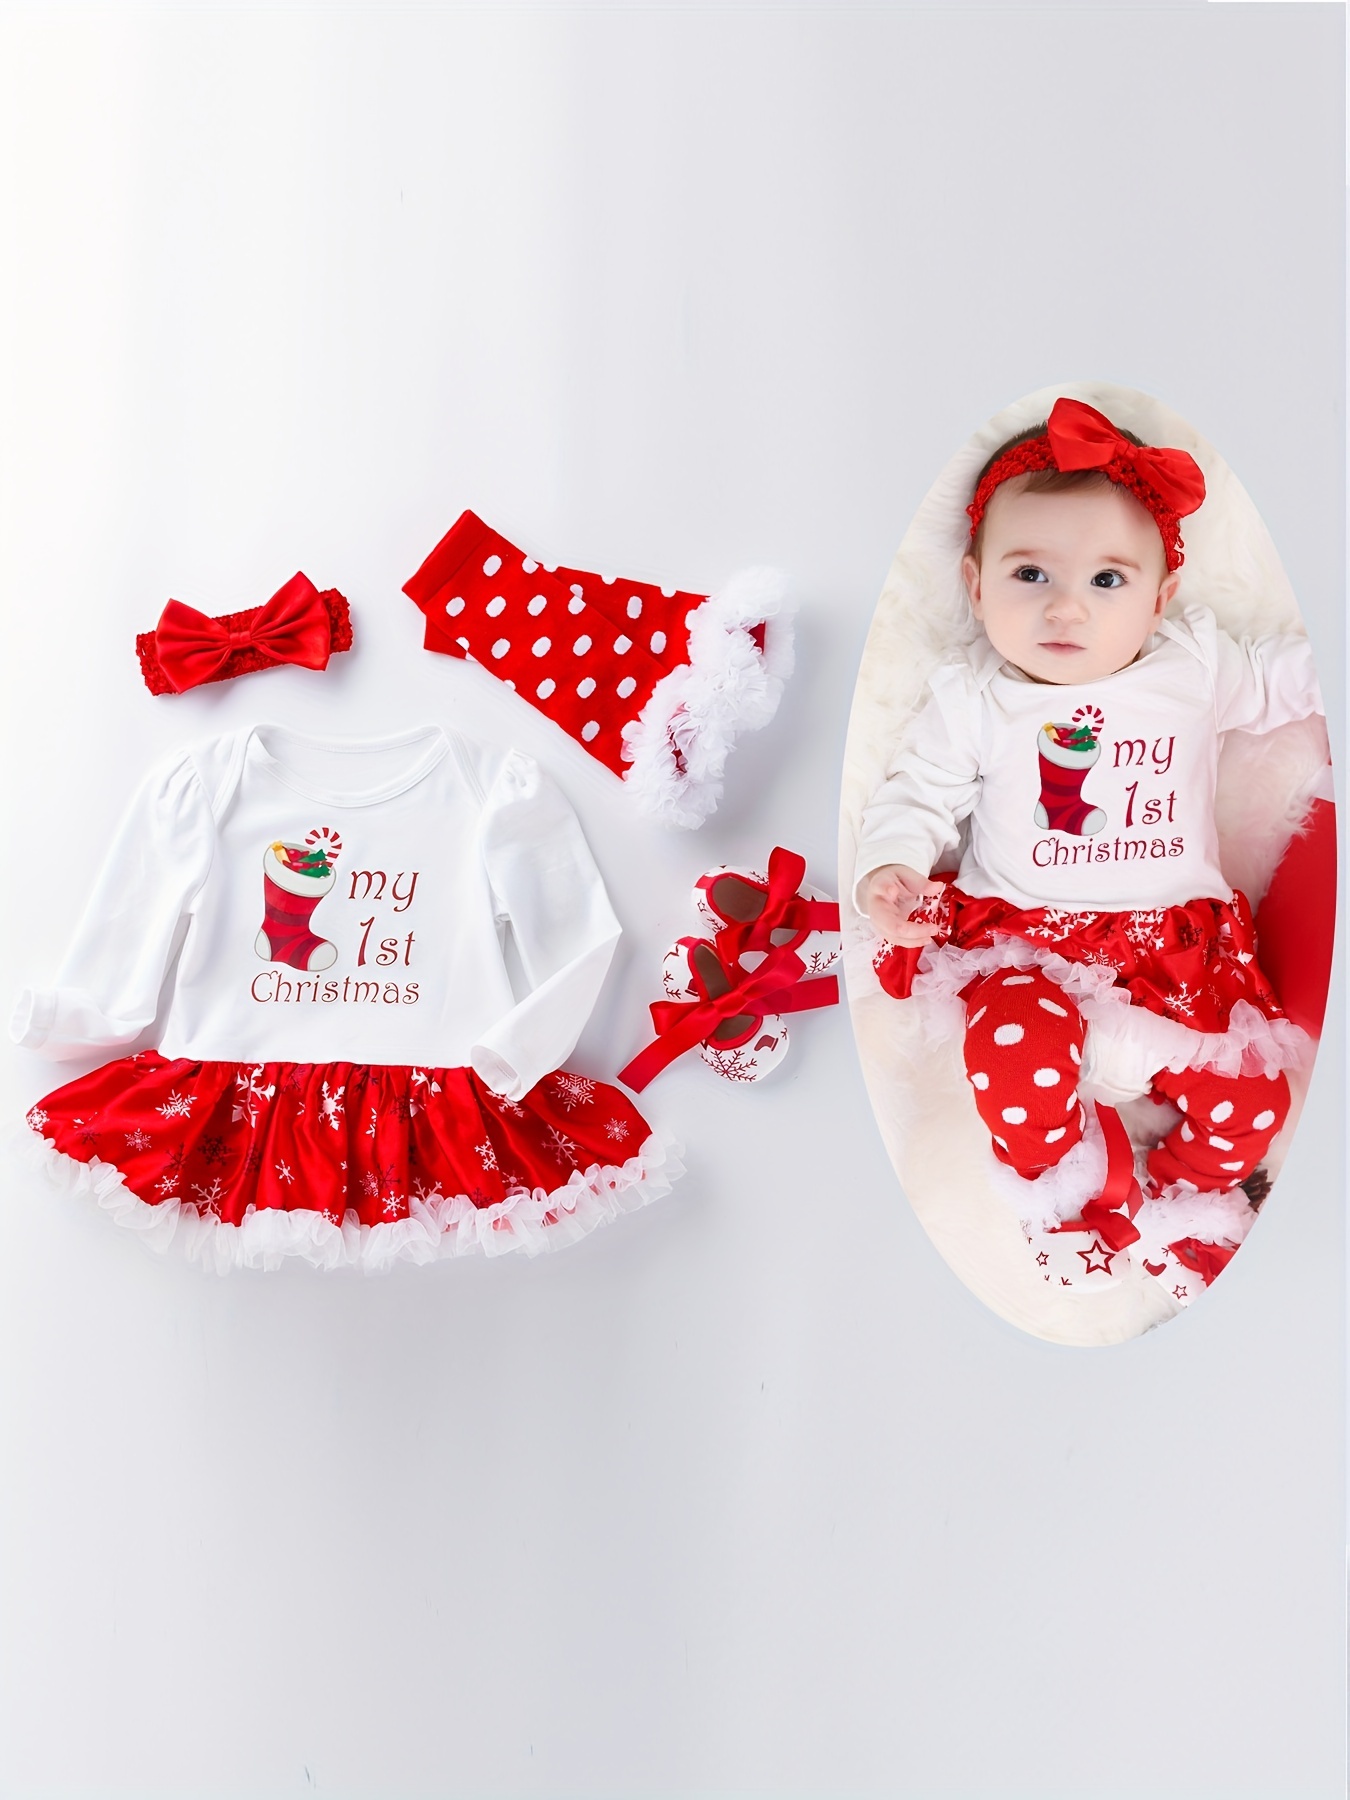 Infant Sweet Minnie Mouse Costume